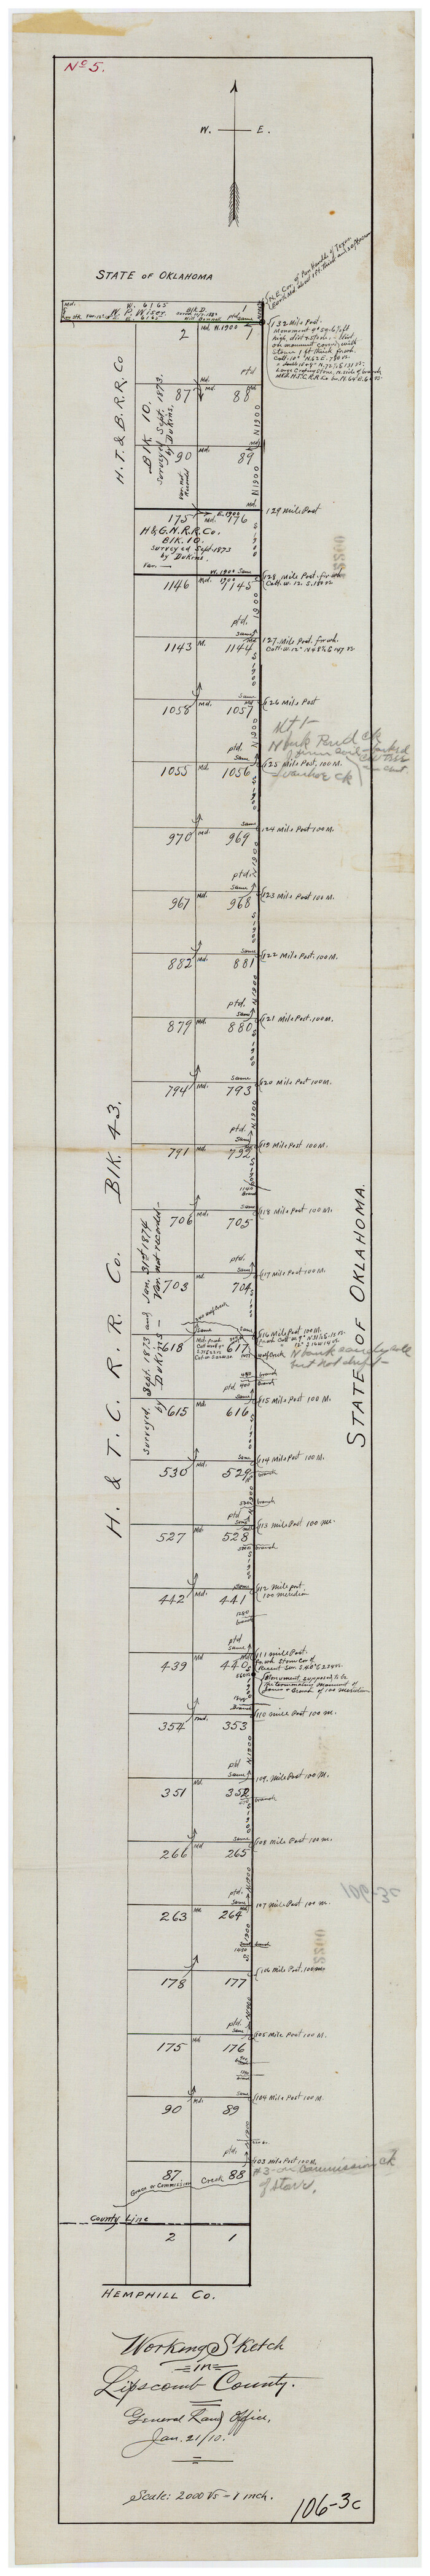 90732, Working Sketch in Lipscomb County, Twichell Survey Records